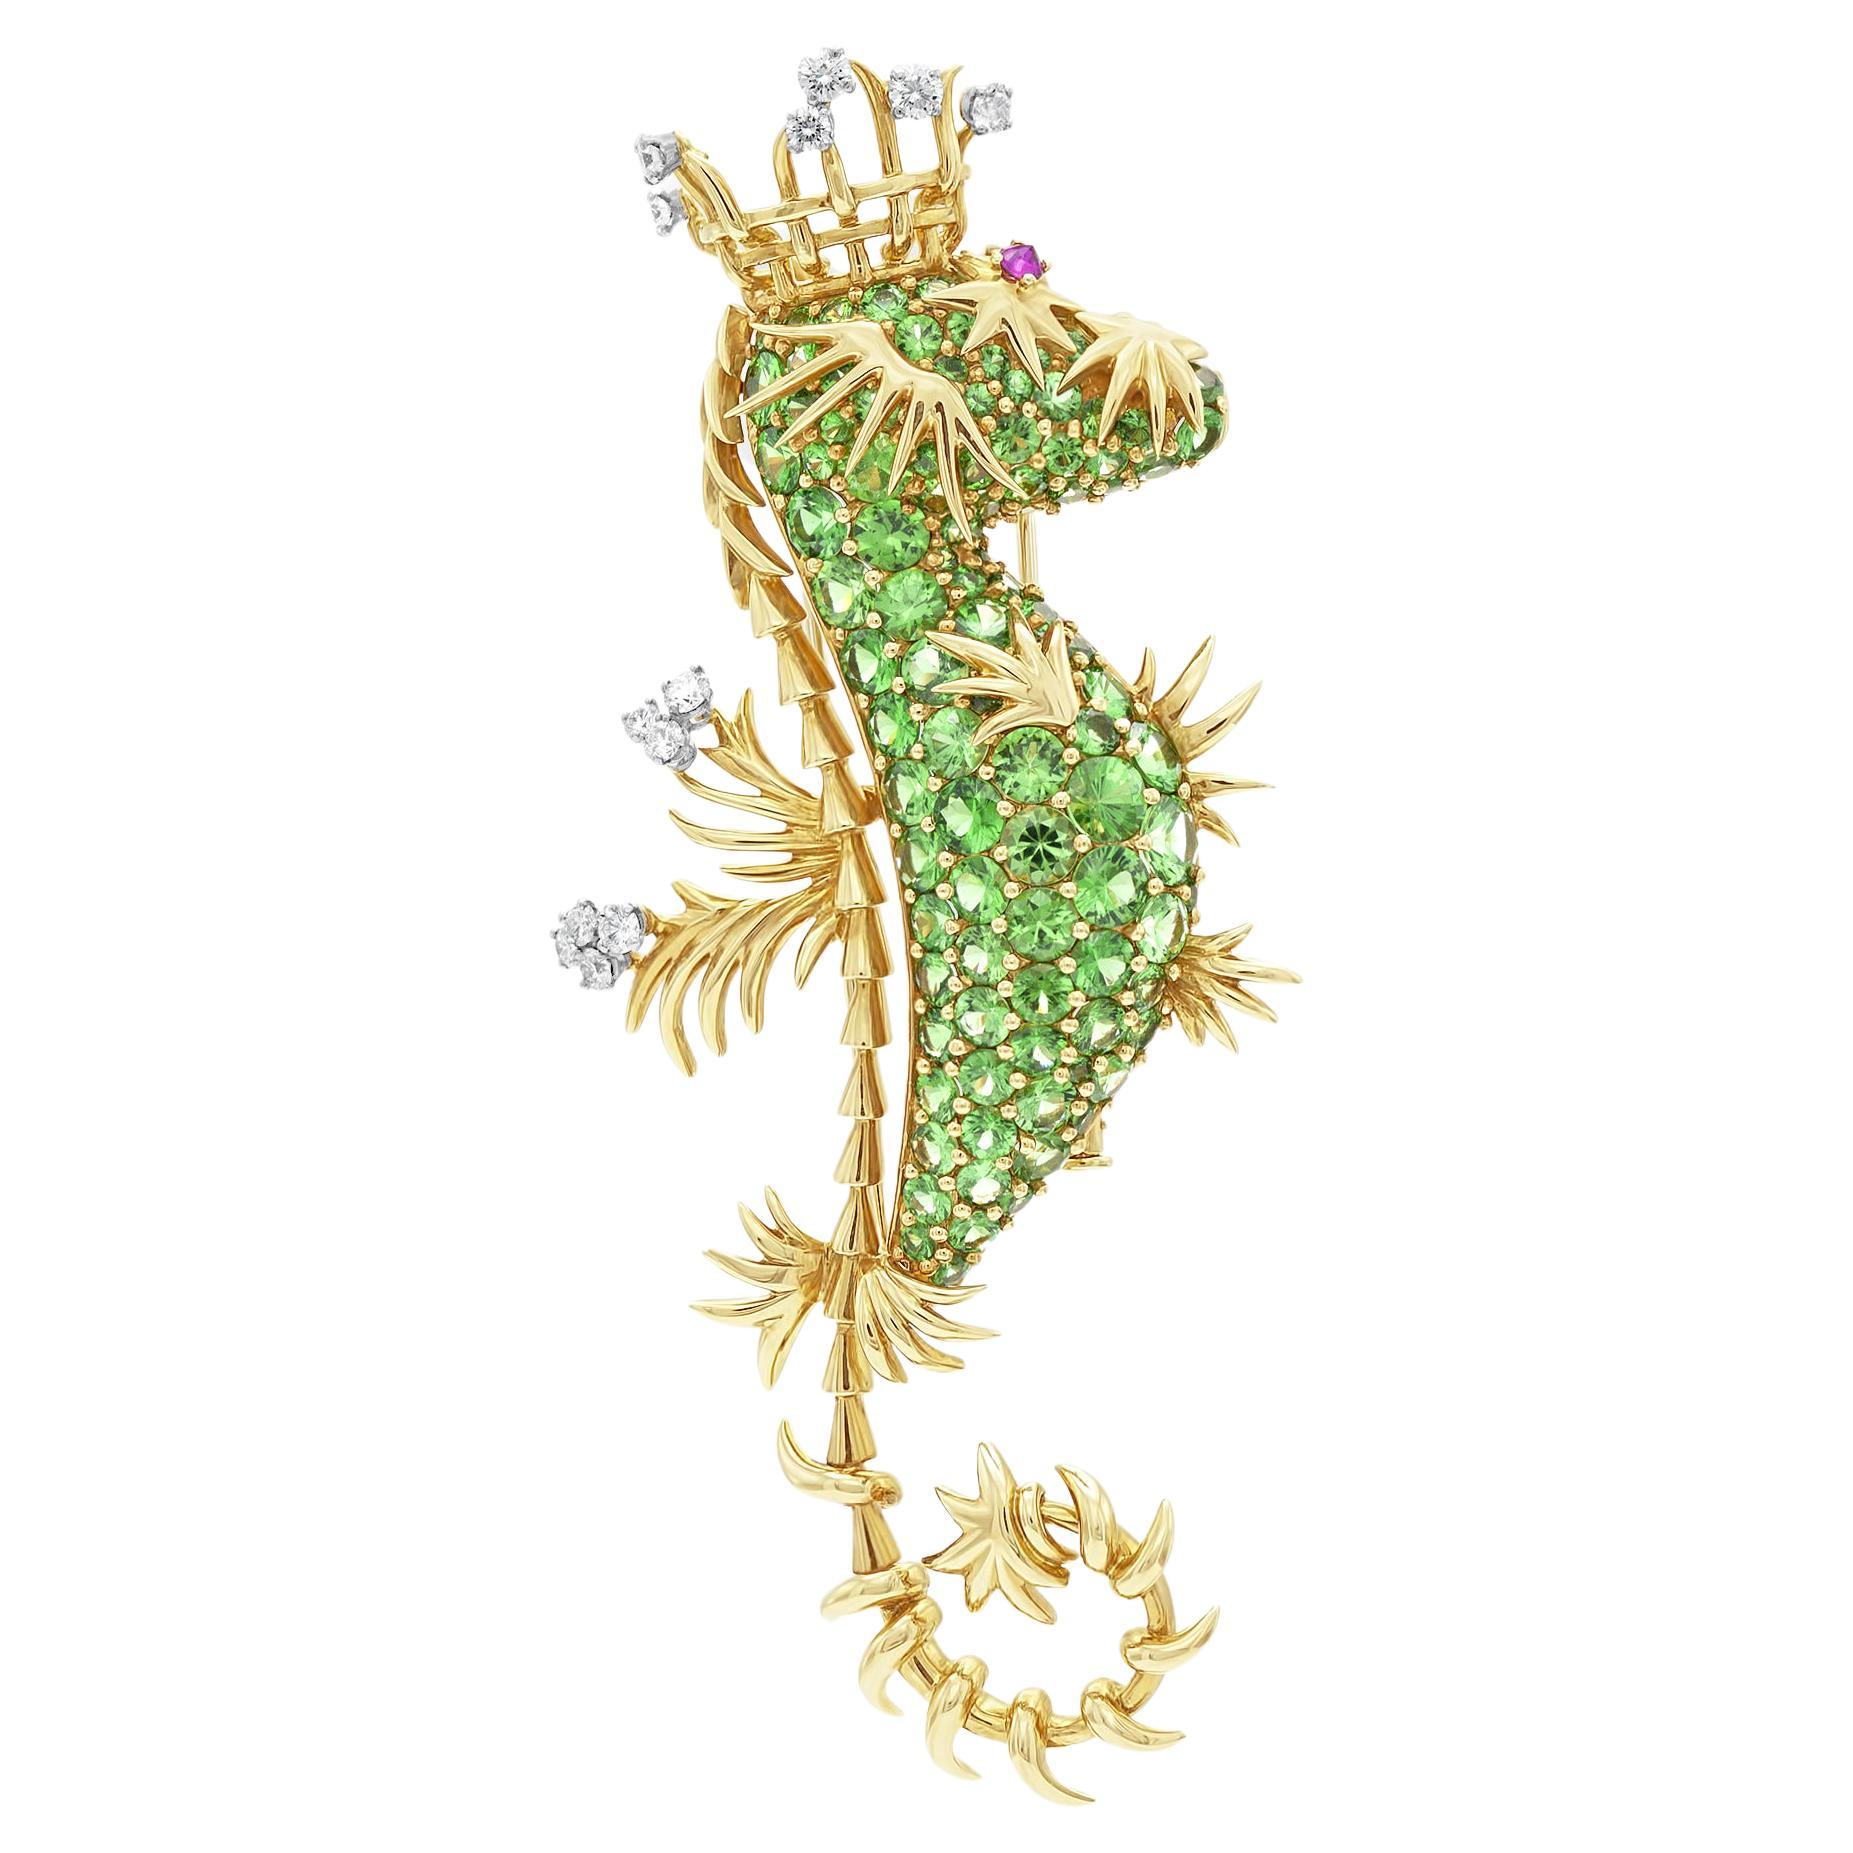 "Seahorse King" Brooch by Schlumberger for Tiffany & Co.